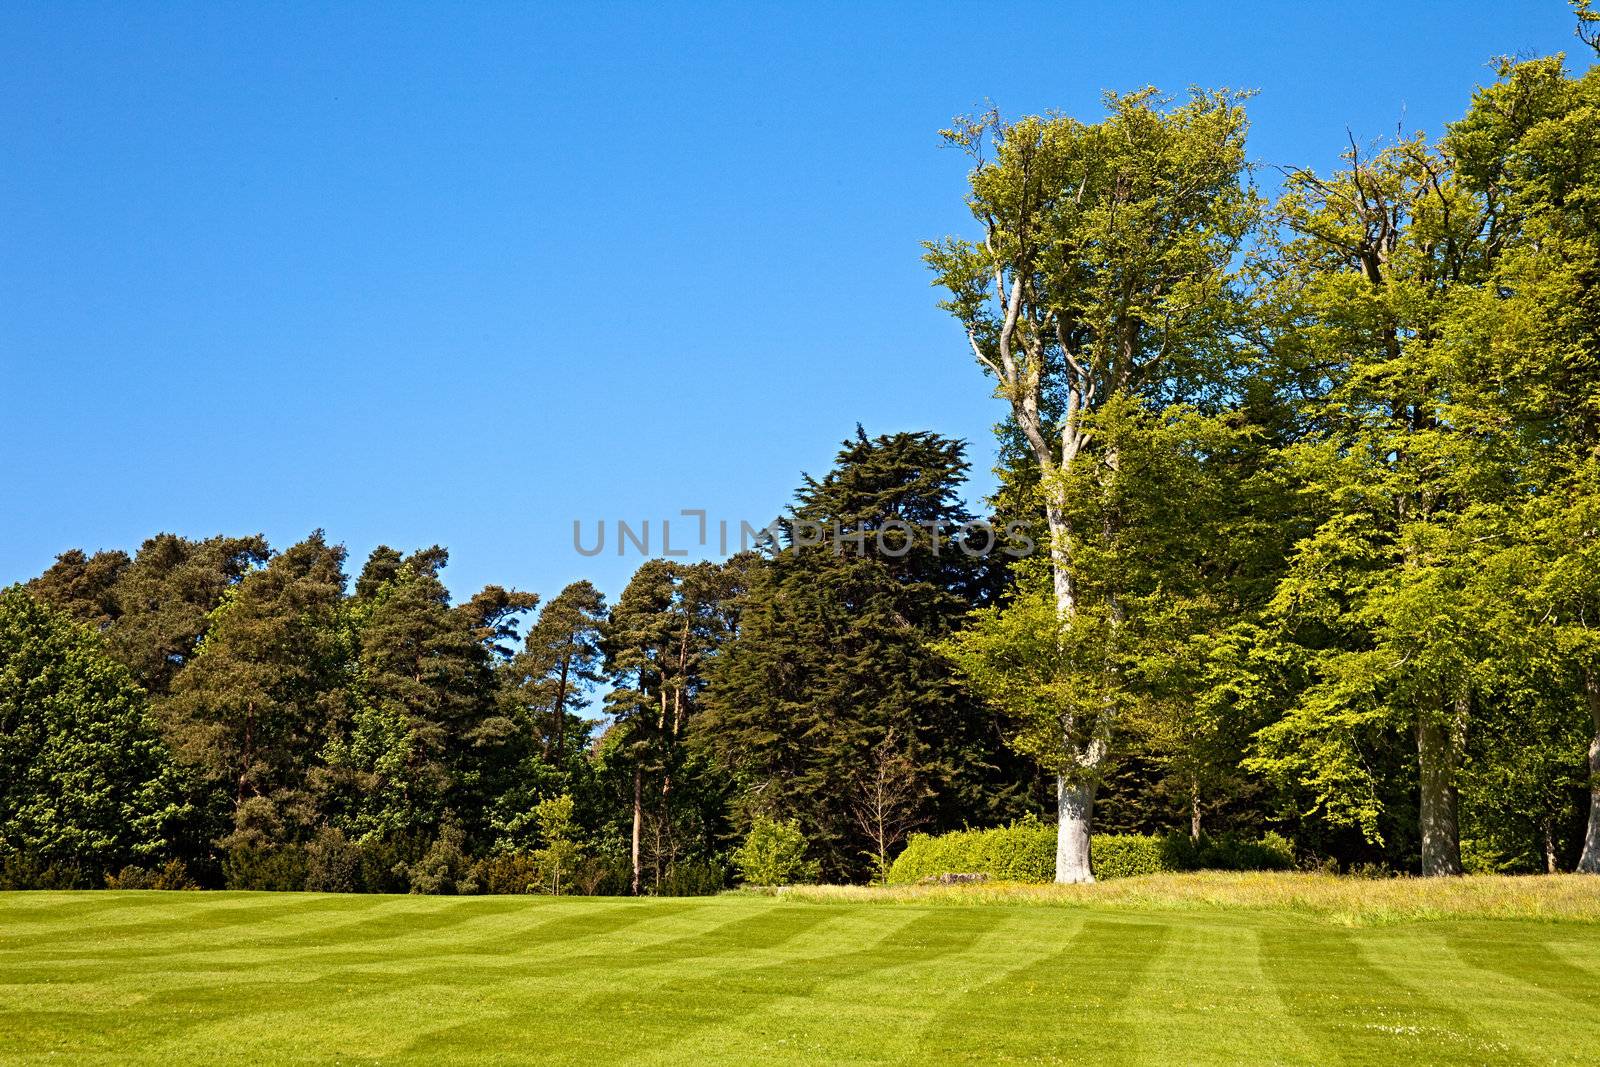 A beautiful striped lawn with trees in the background